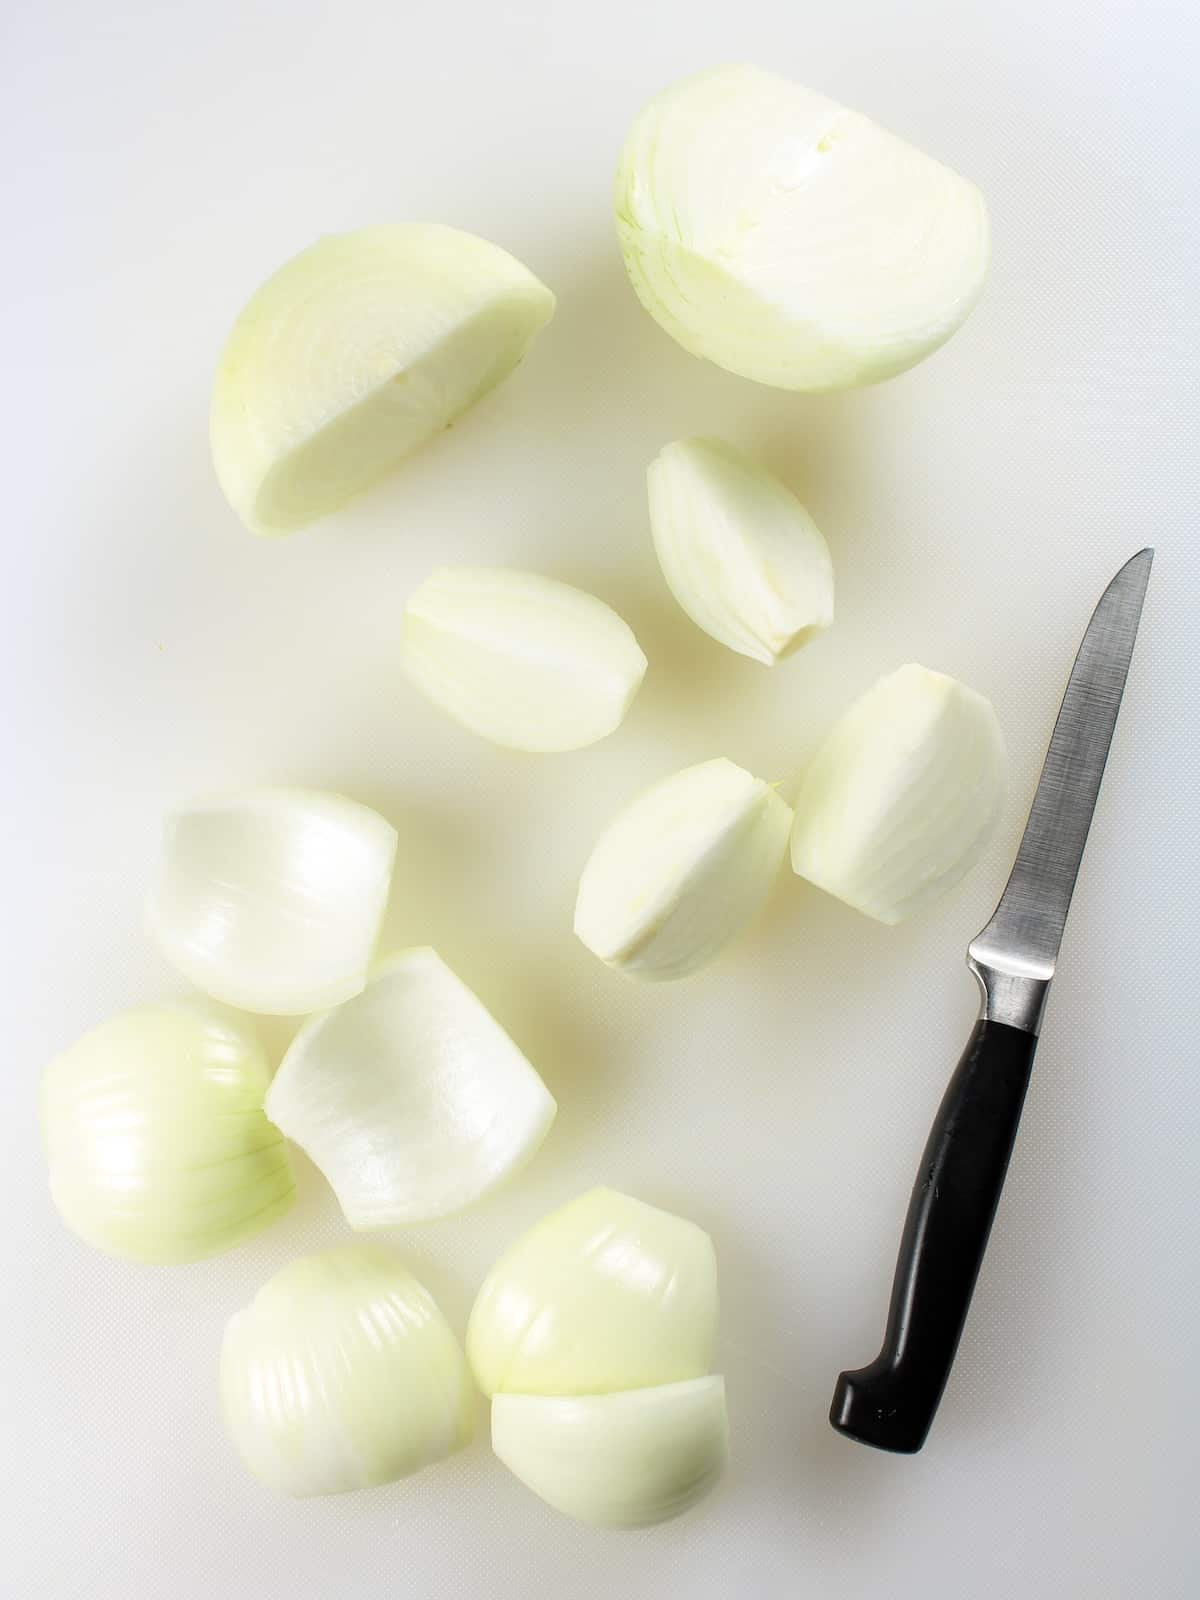 Onions being chopped on a cutting board.